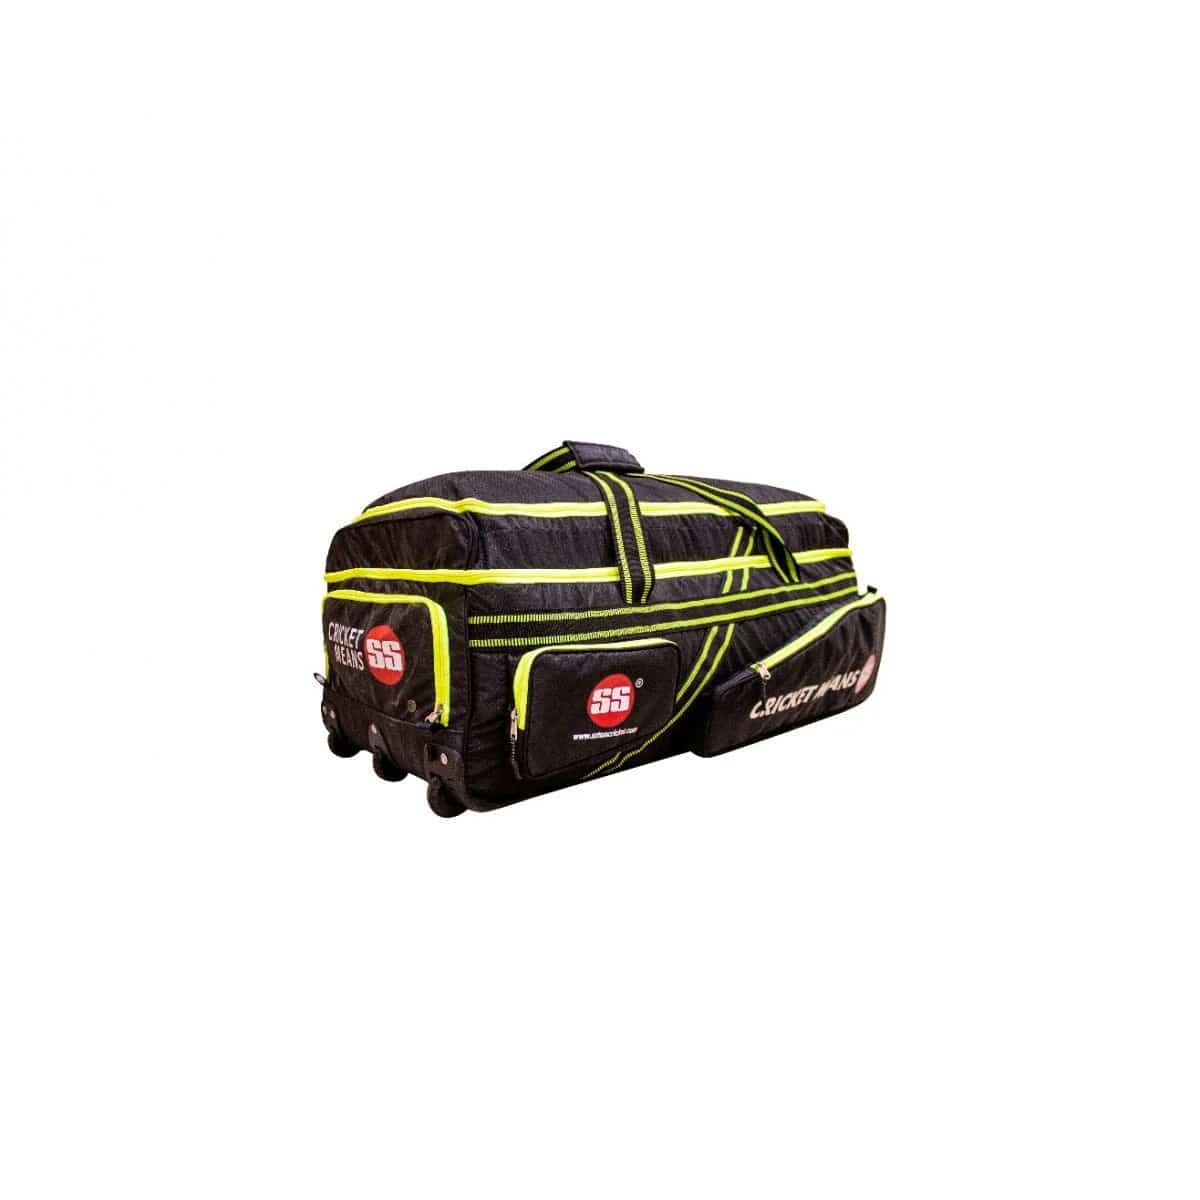 SS Cricket Bags SS Pro Player Kit Bag